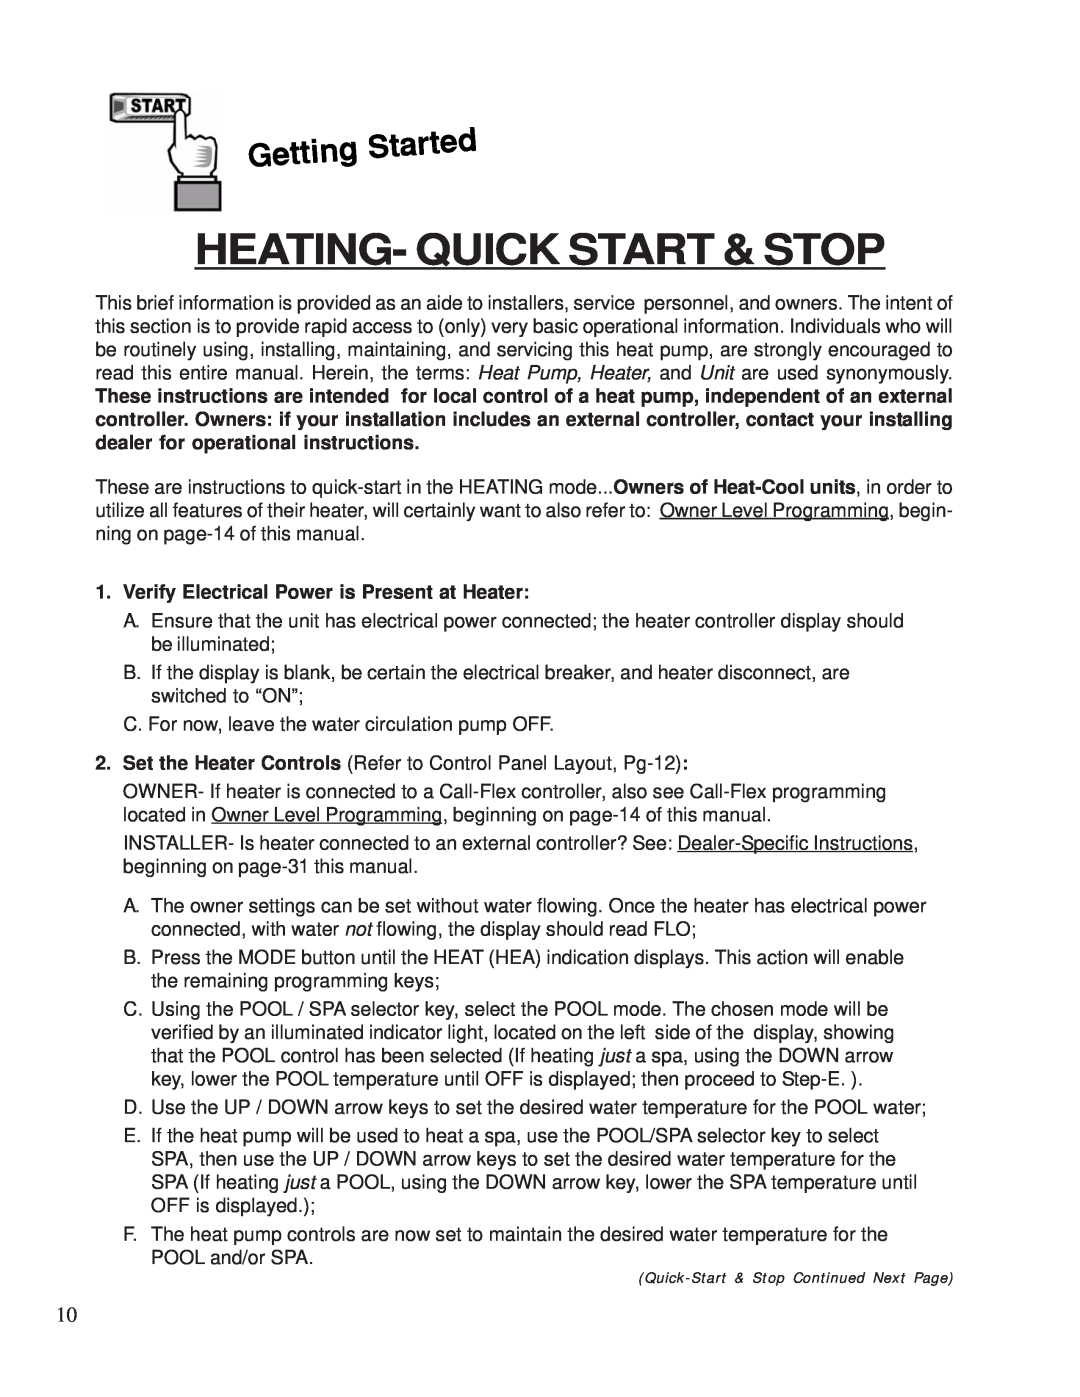 Aquacal 100 owner manual Heating- Quick Start & Stop, Verify Electrical Power is Present at Heater 